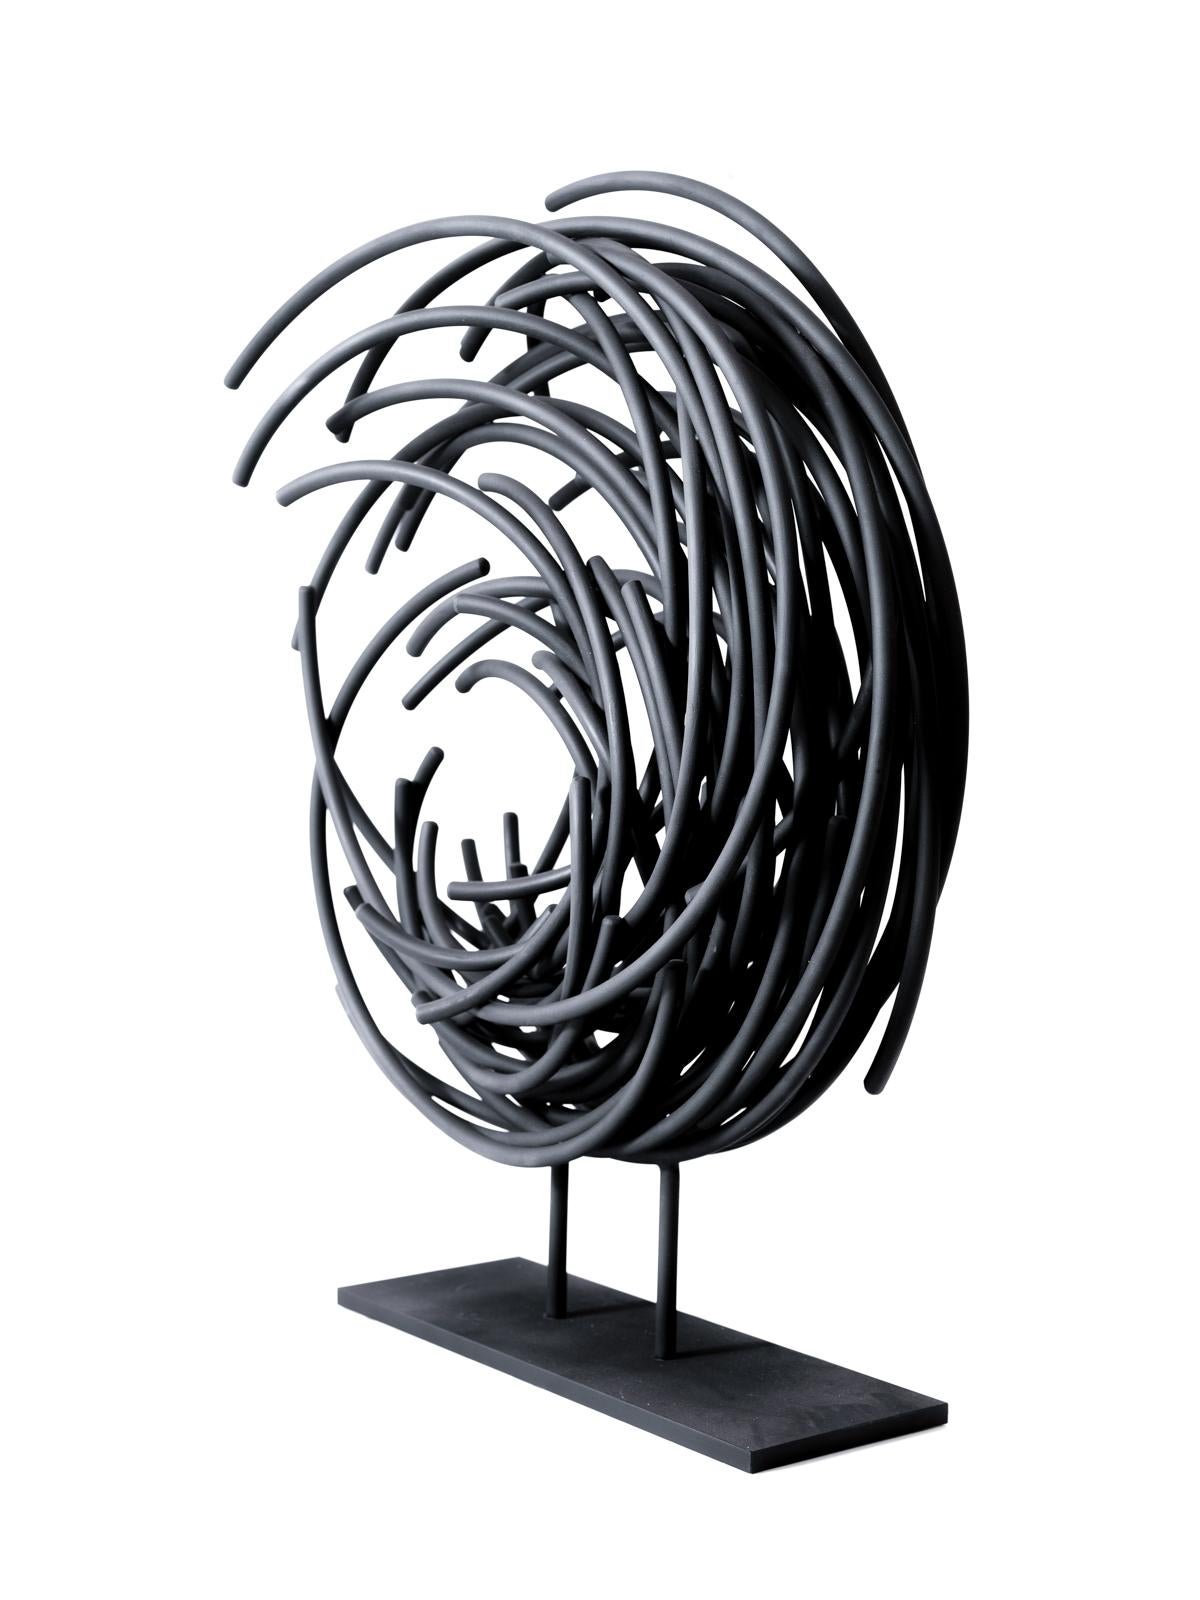 In jet matte black, this dynamic sculpture by Shayne Dark is part of an exciting new series called Maelstrom. Known for his uniquely beautiful abstract work, this piece is hand forged from small round aluminum rods formed into a circular shape that